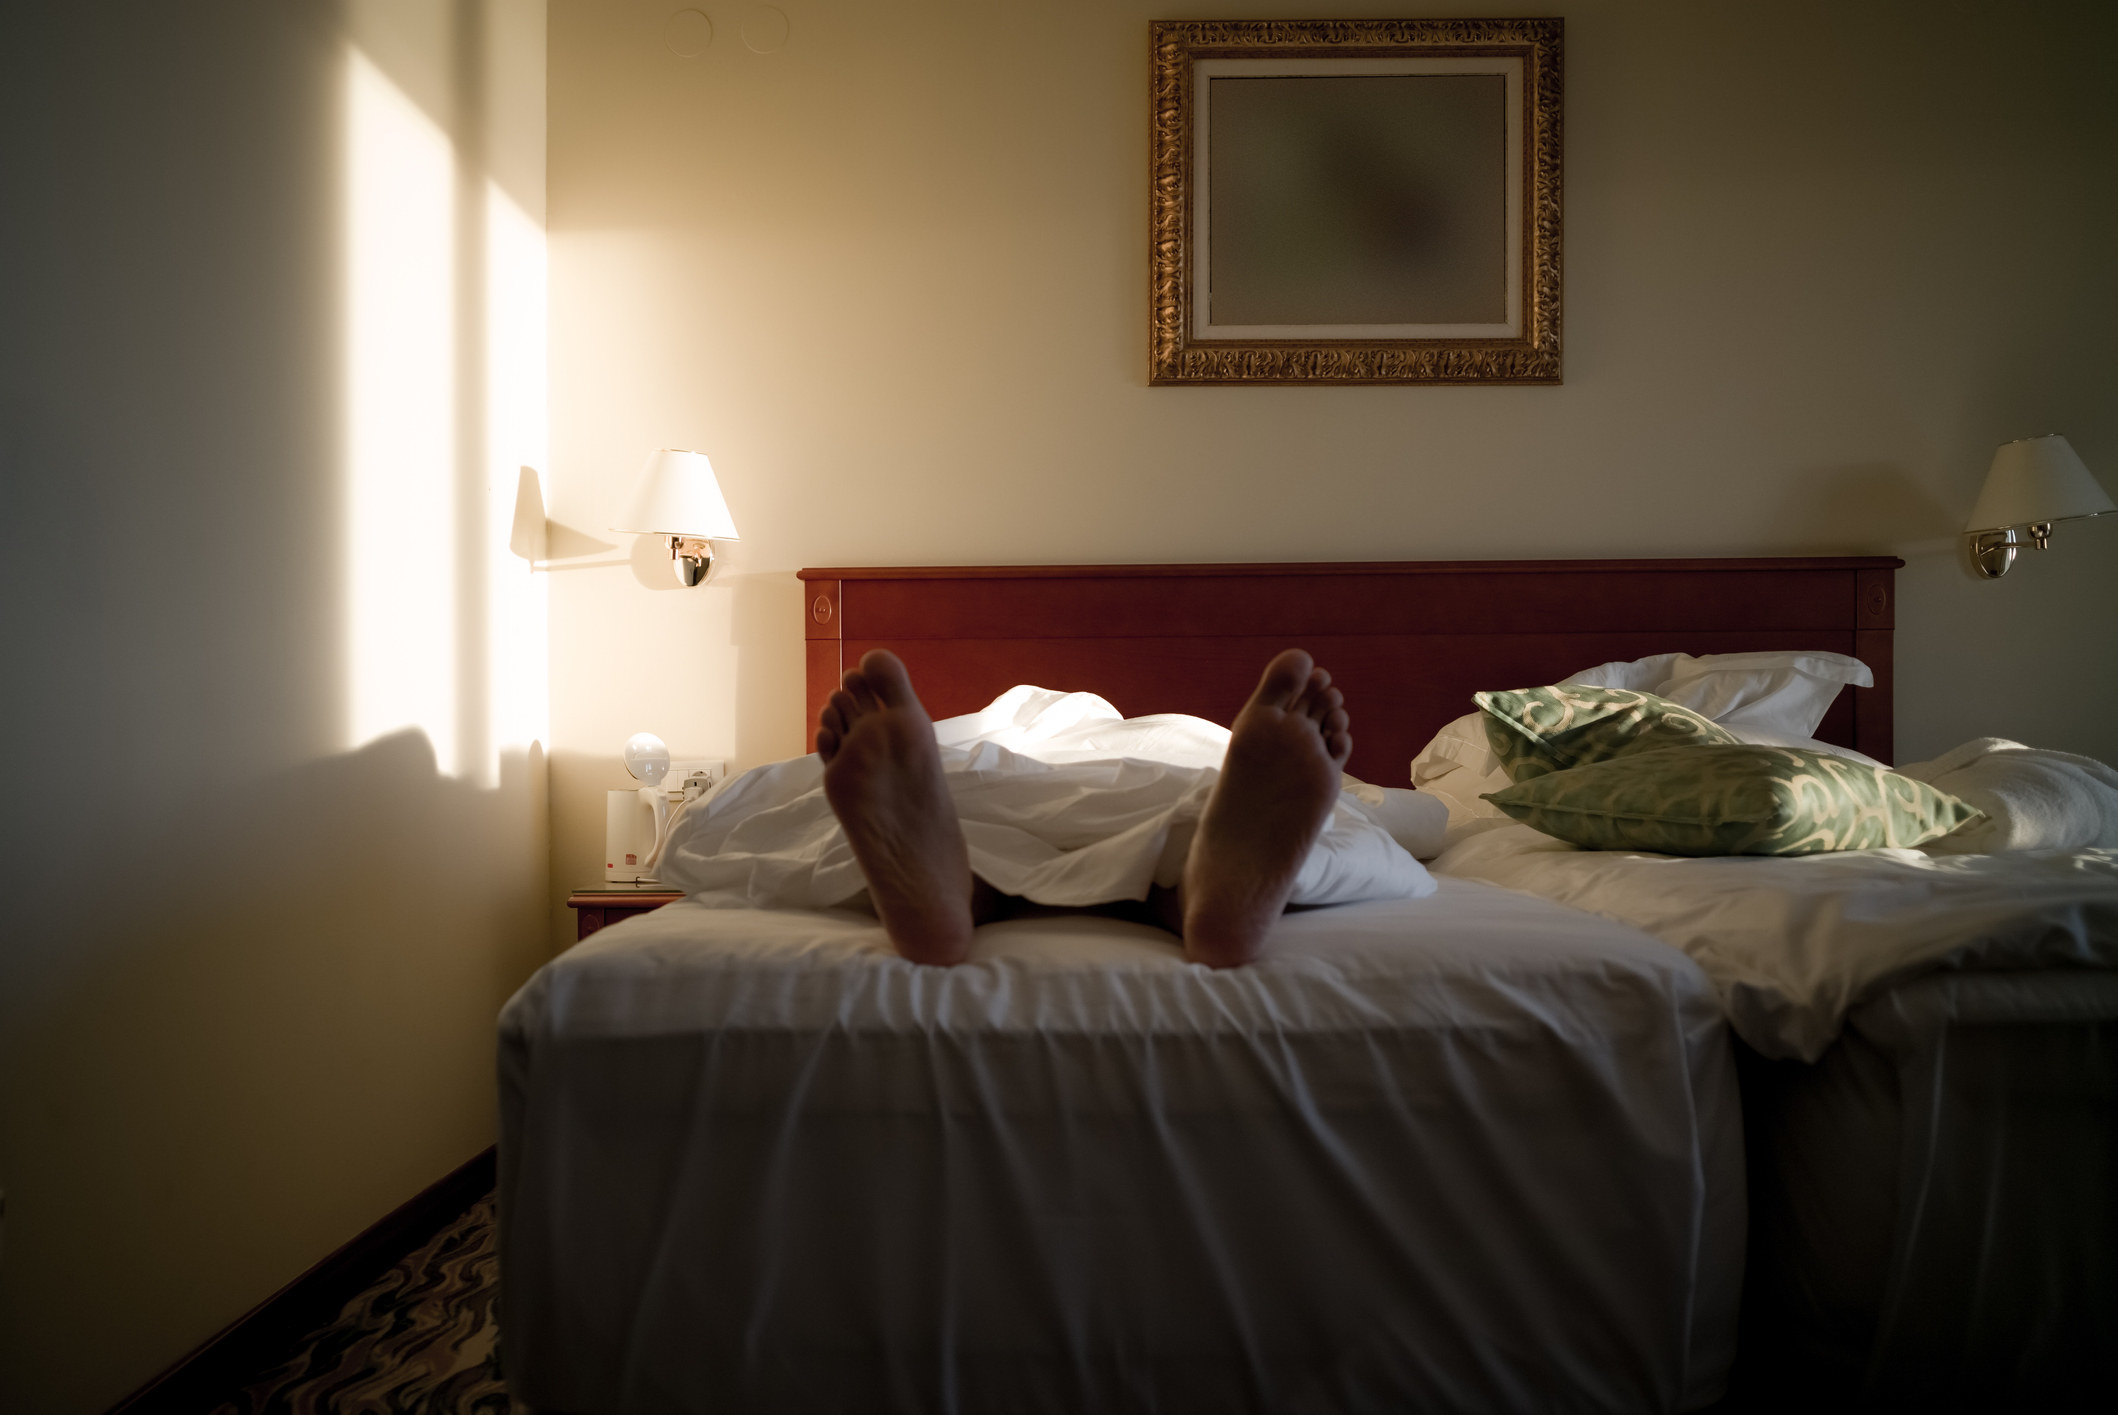 body on a hotel bed